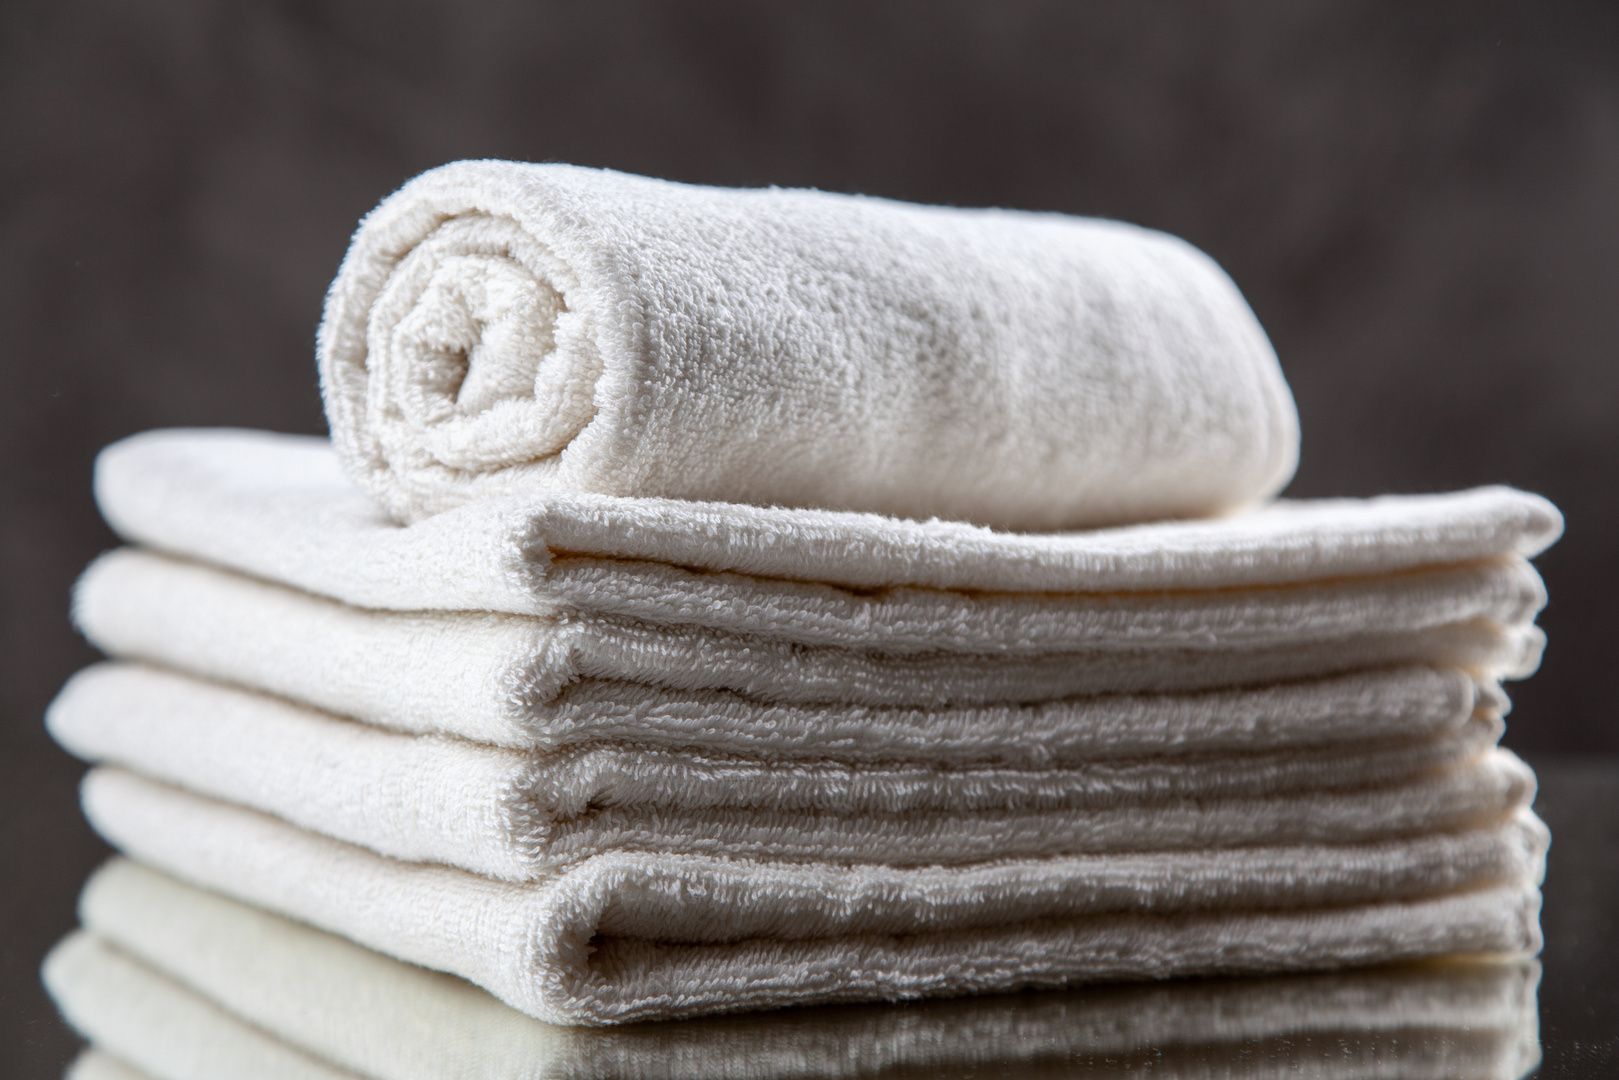 Pile of White Towels